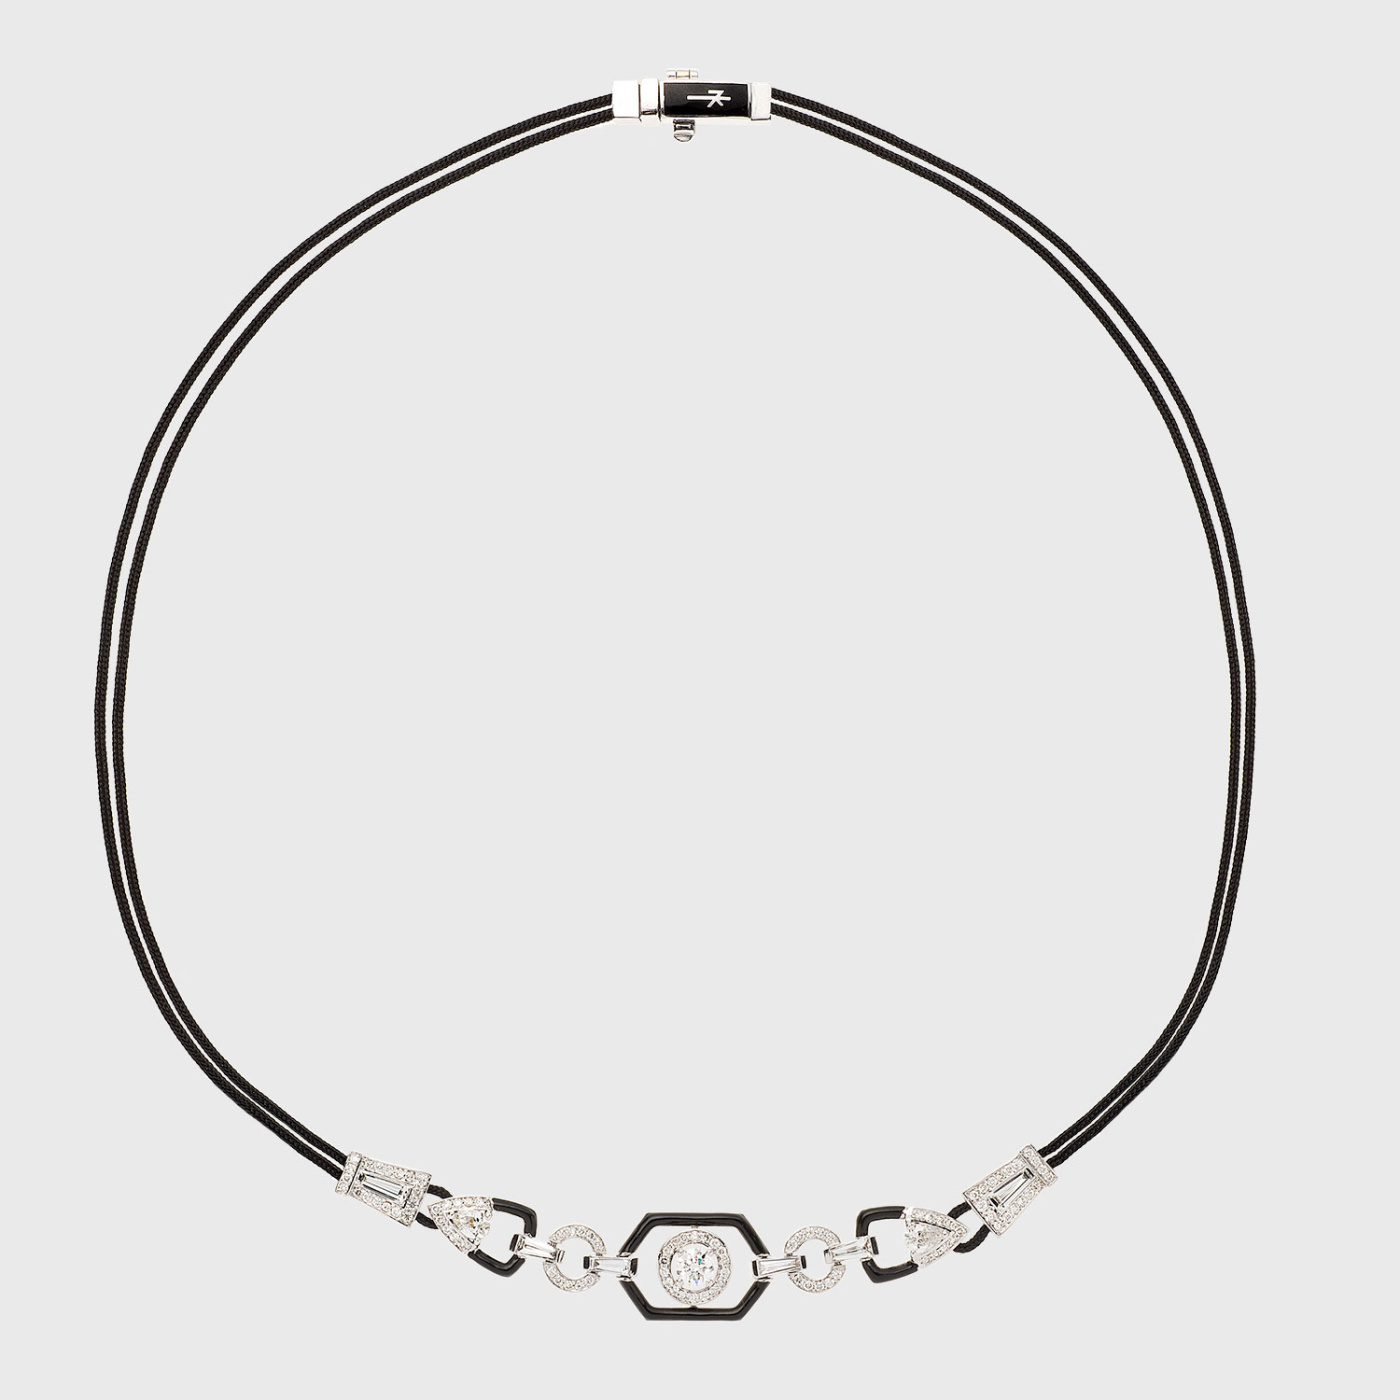 White gold cord necklace with white diamonds and black enamel